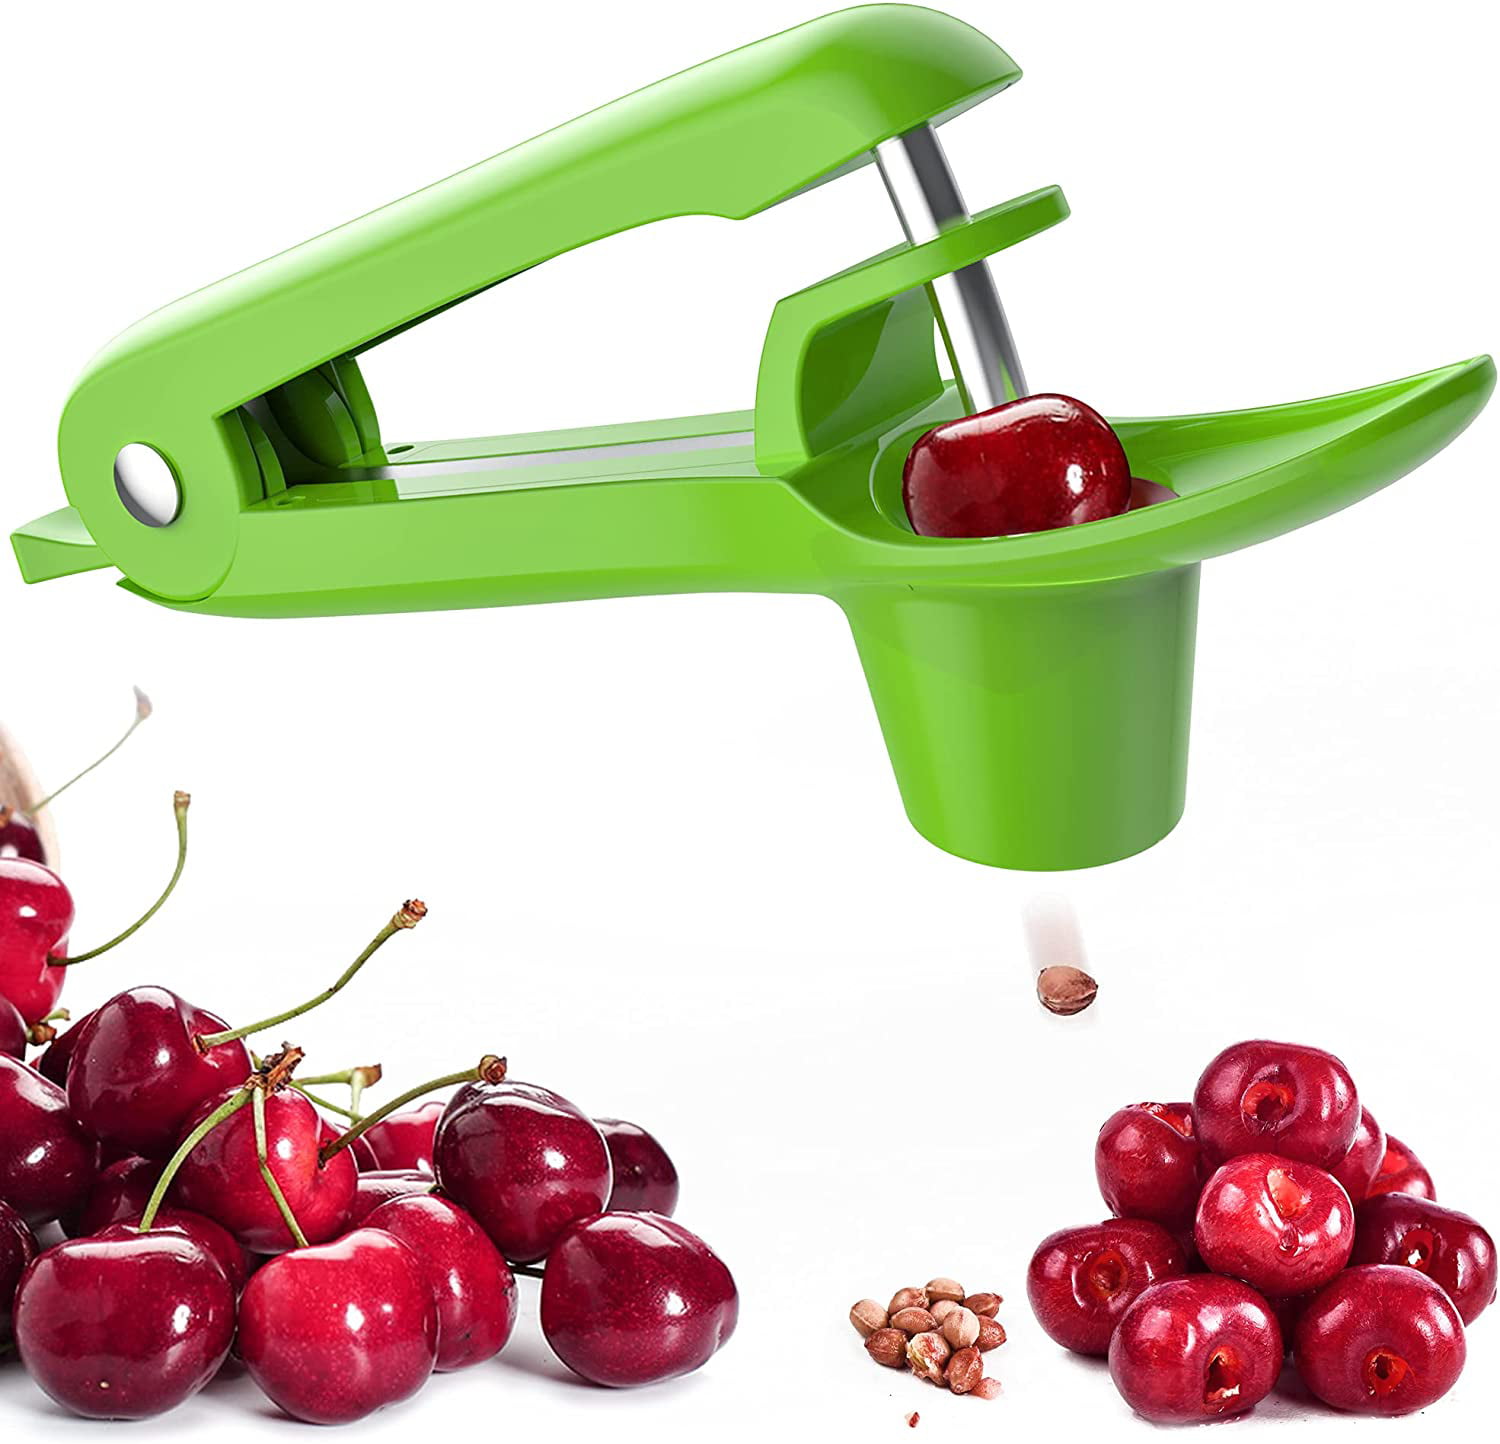 Black Cherry Corer Pitter Tool for Cherries Jam Cherry Pit Remover Tool Stainless Steel Cherry Pitter Tool,Pit Remover for Cherries Olive Pit Remover Heavy-Duty Cherry Seed Remover 